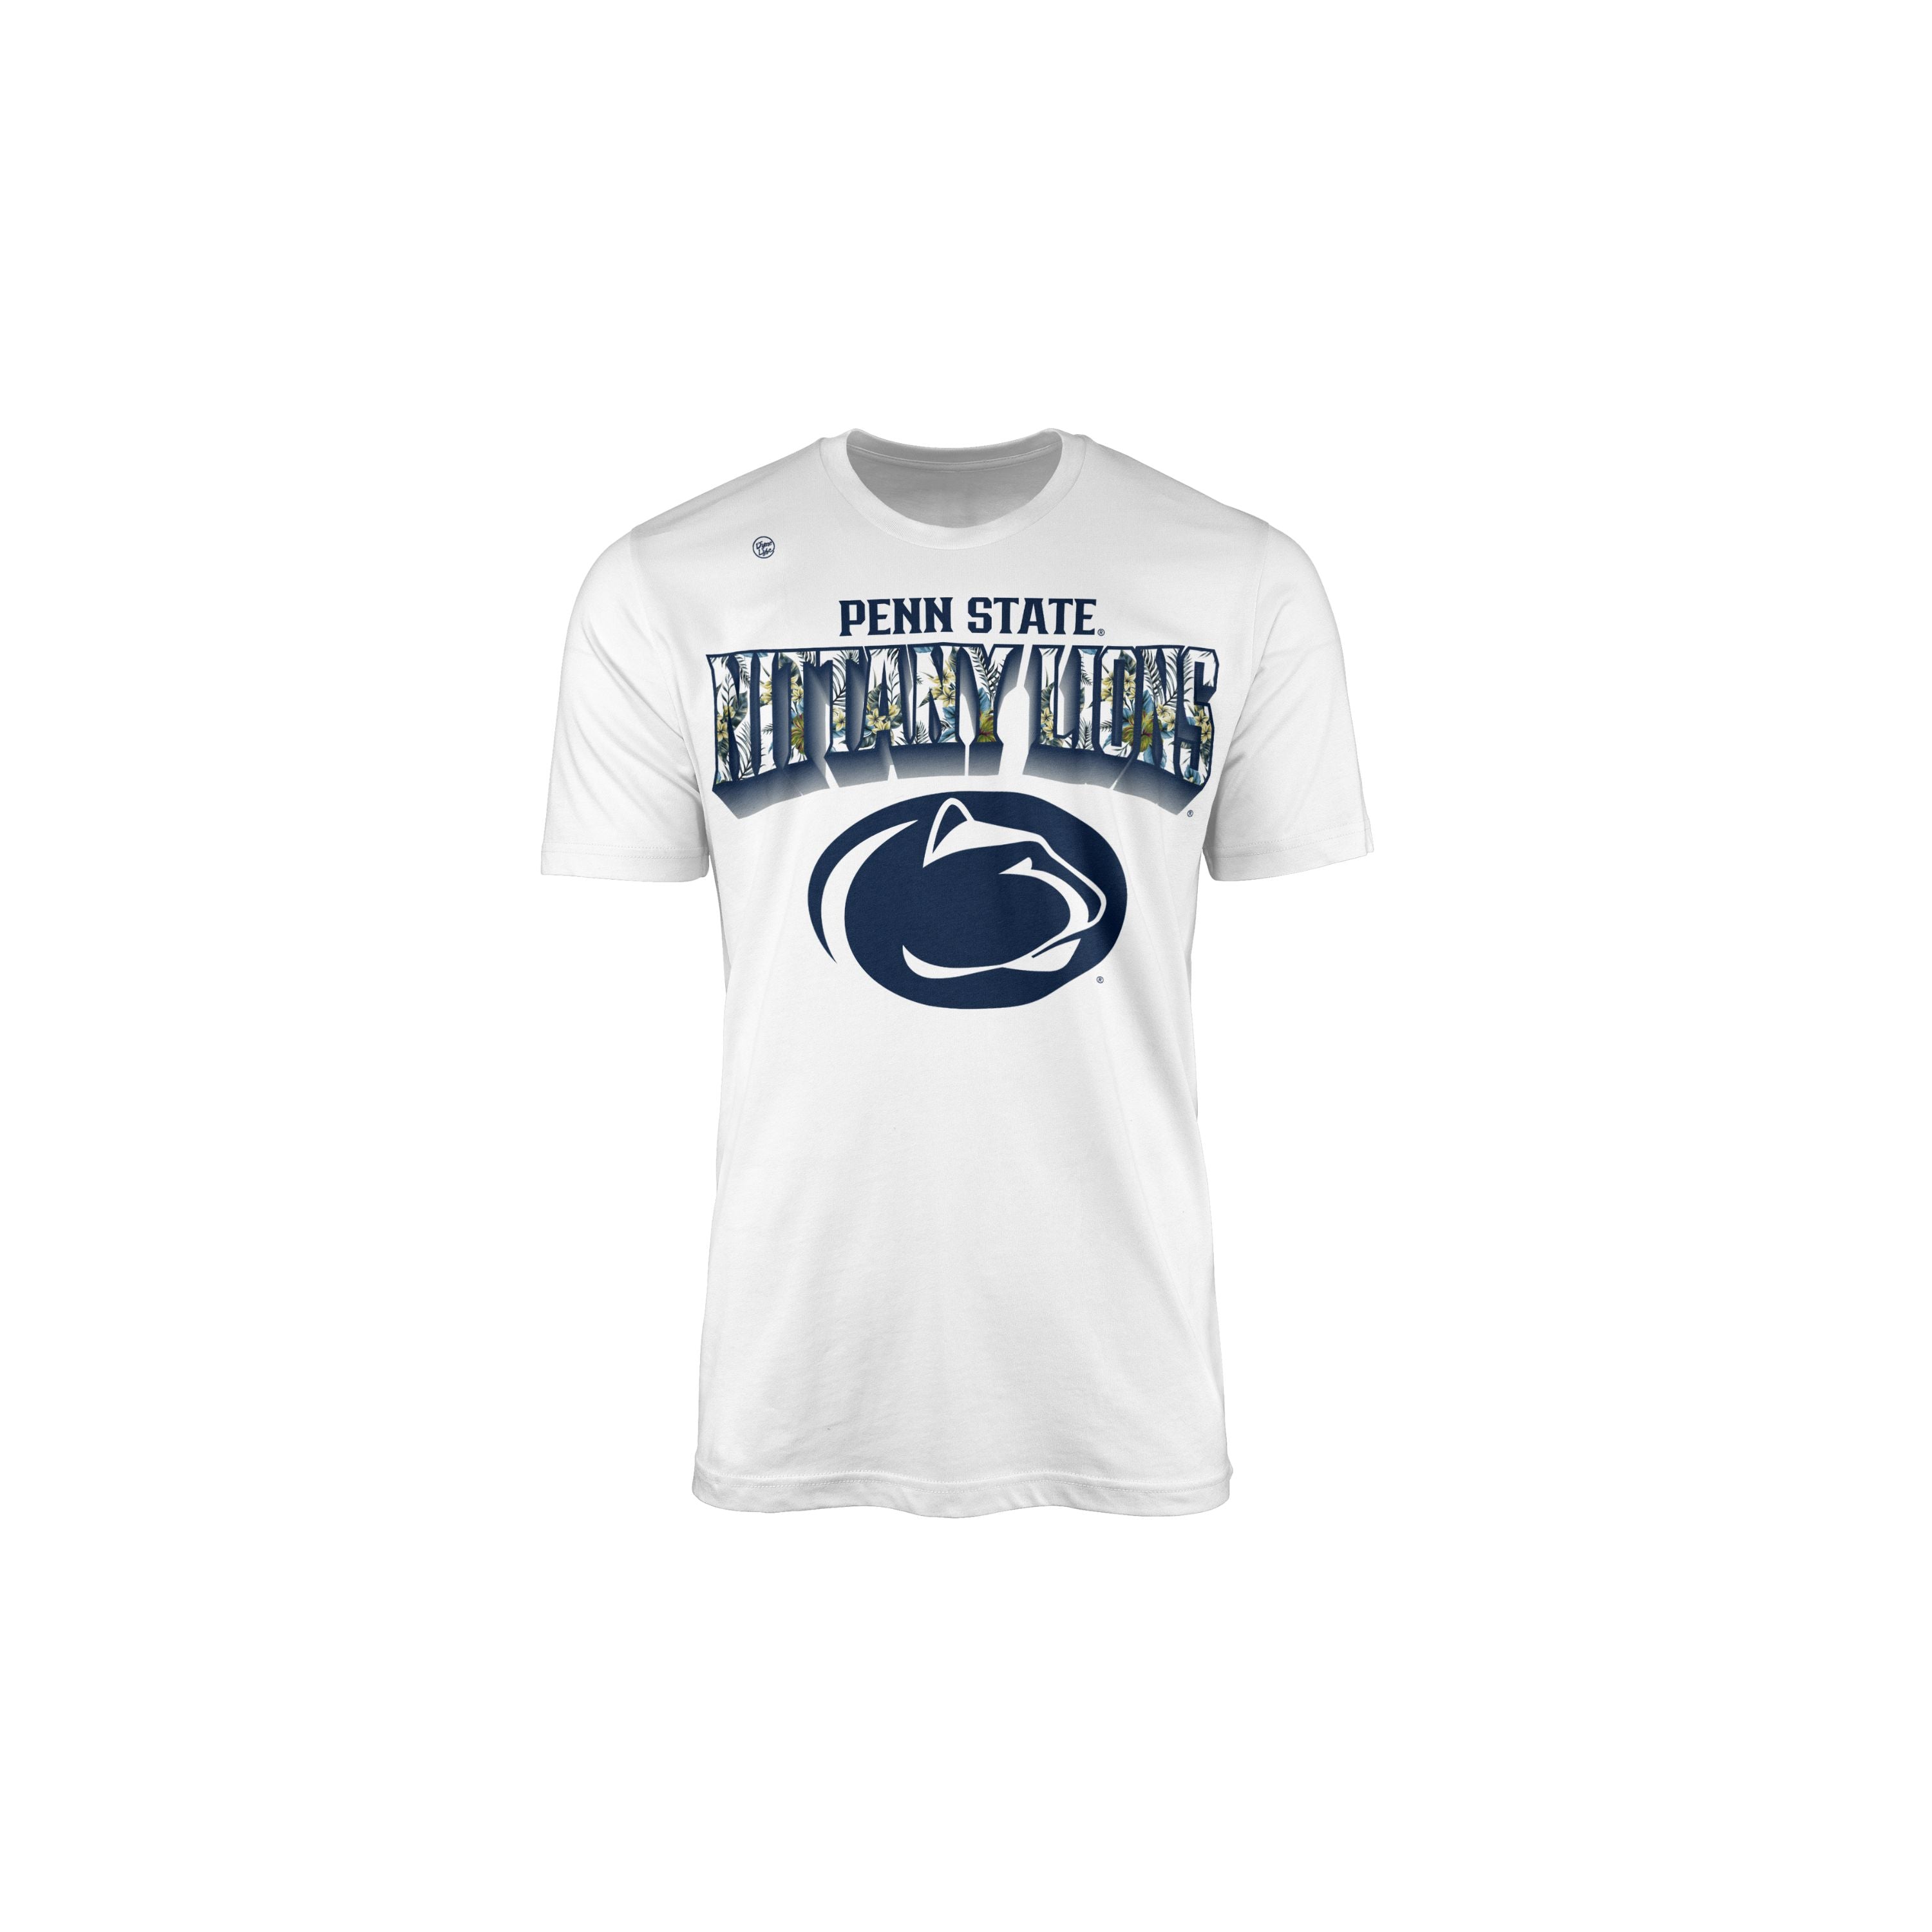 Penn State Nittany Lions Youth Floral Team Tee